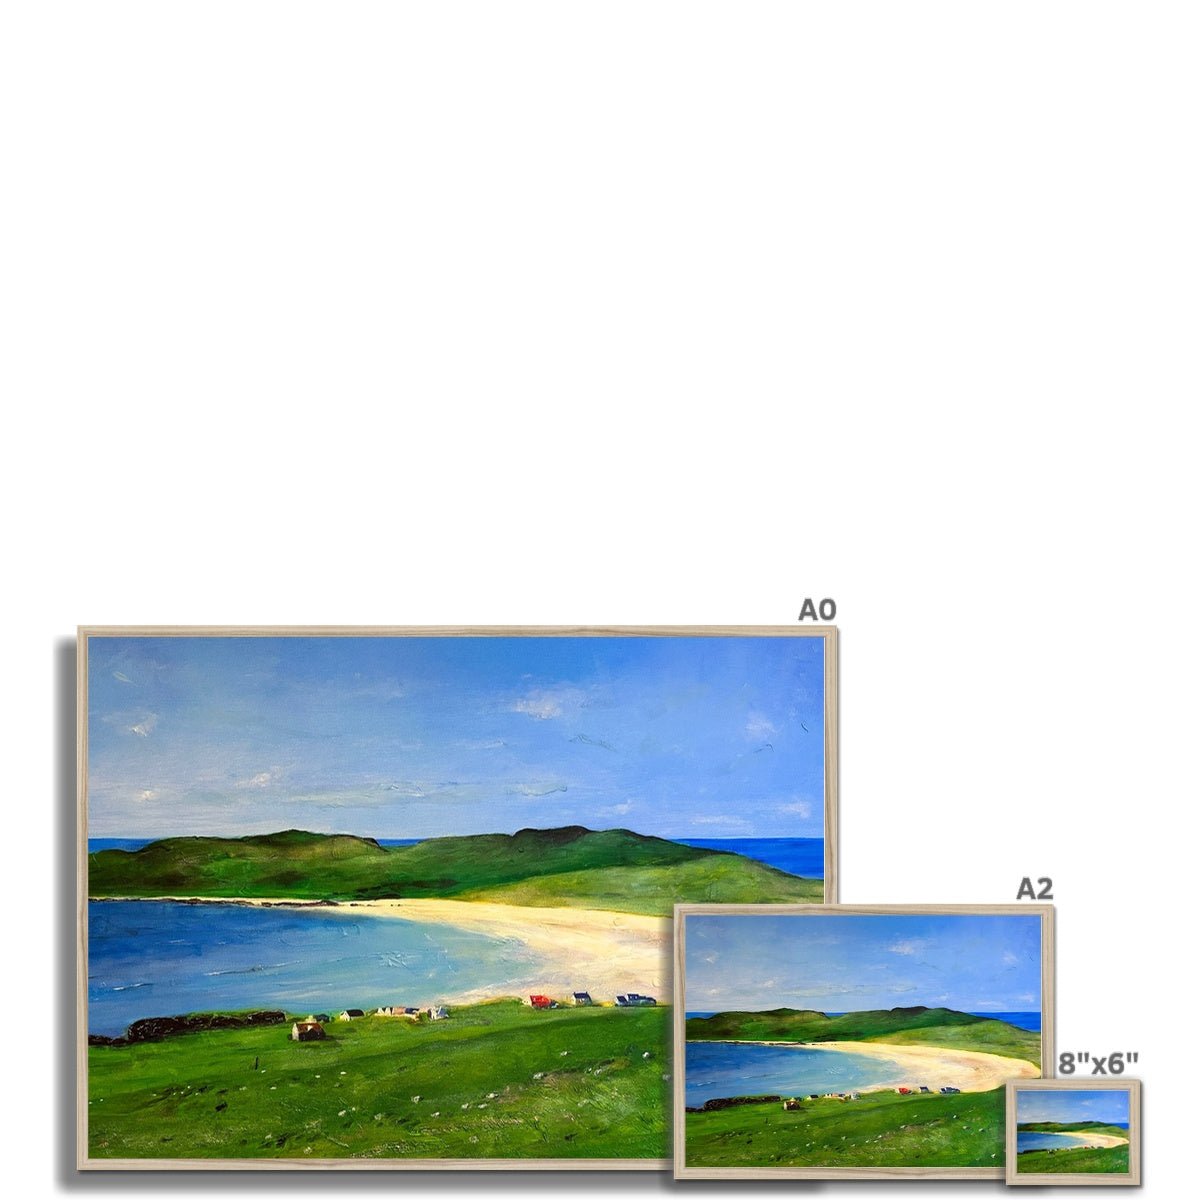 Balephuil Beach Tiree Painting | Framed Prints From Scotland-Framed Prints-Hebridean Islands Art Gallery-Paintings, Prints, Homeware, Art Gifts From Scotland By Scottish Artist Kevin Hunter